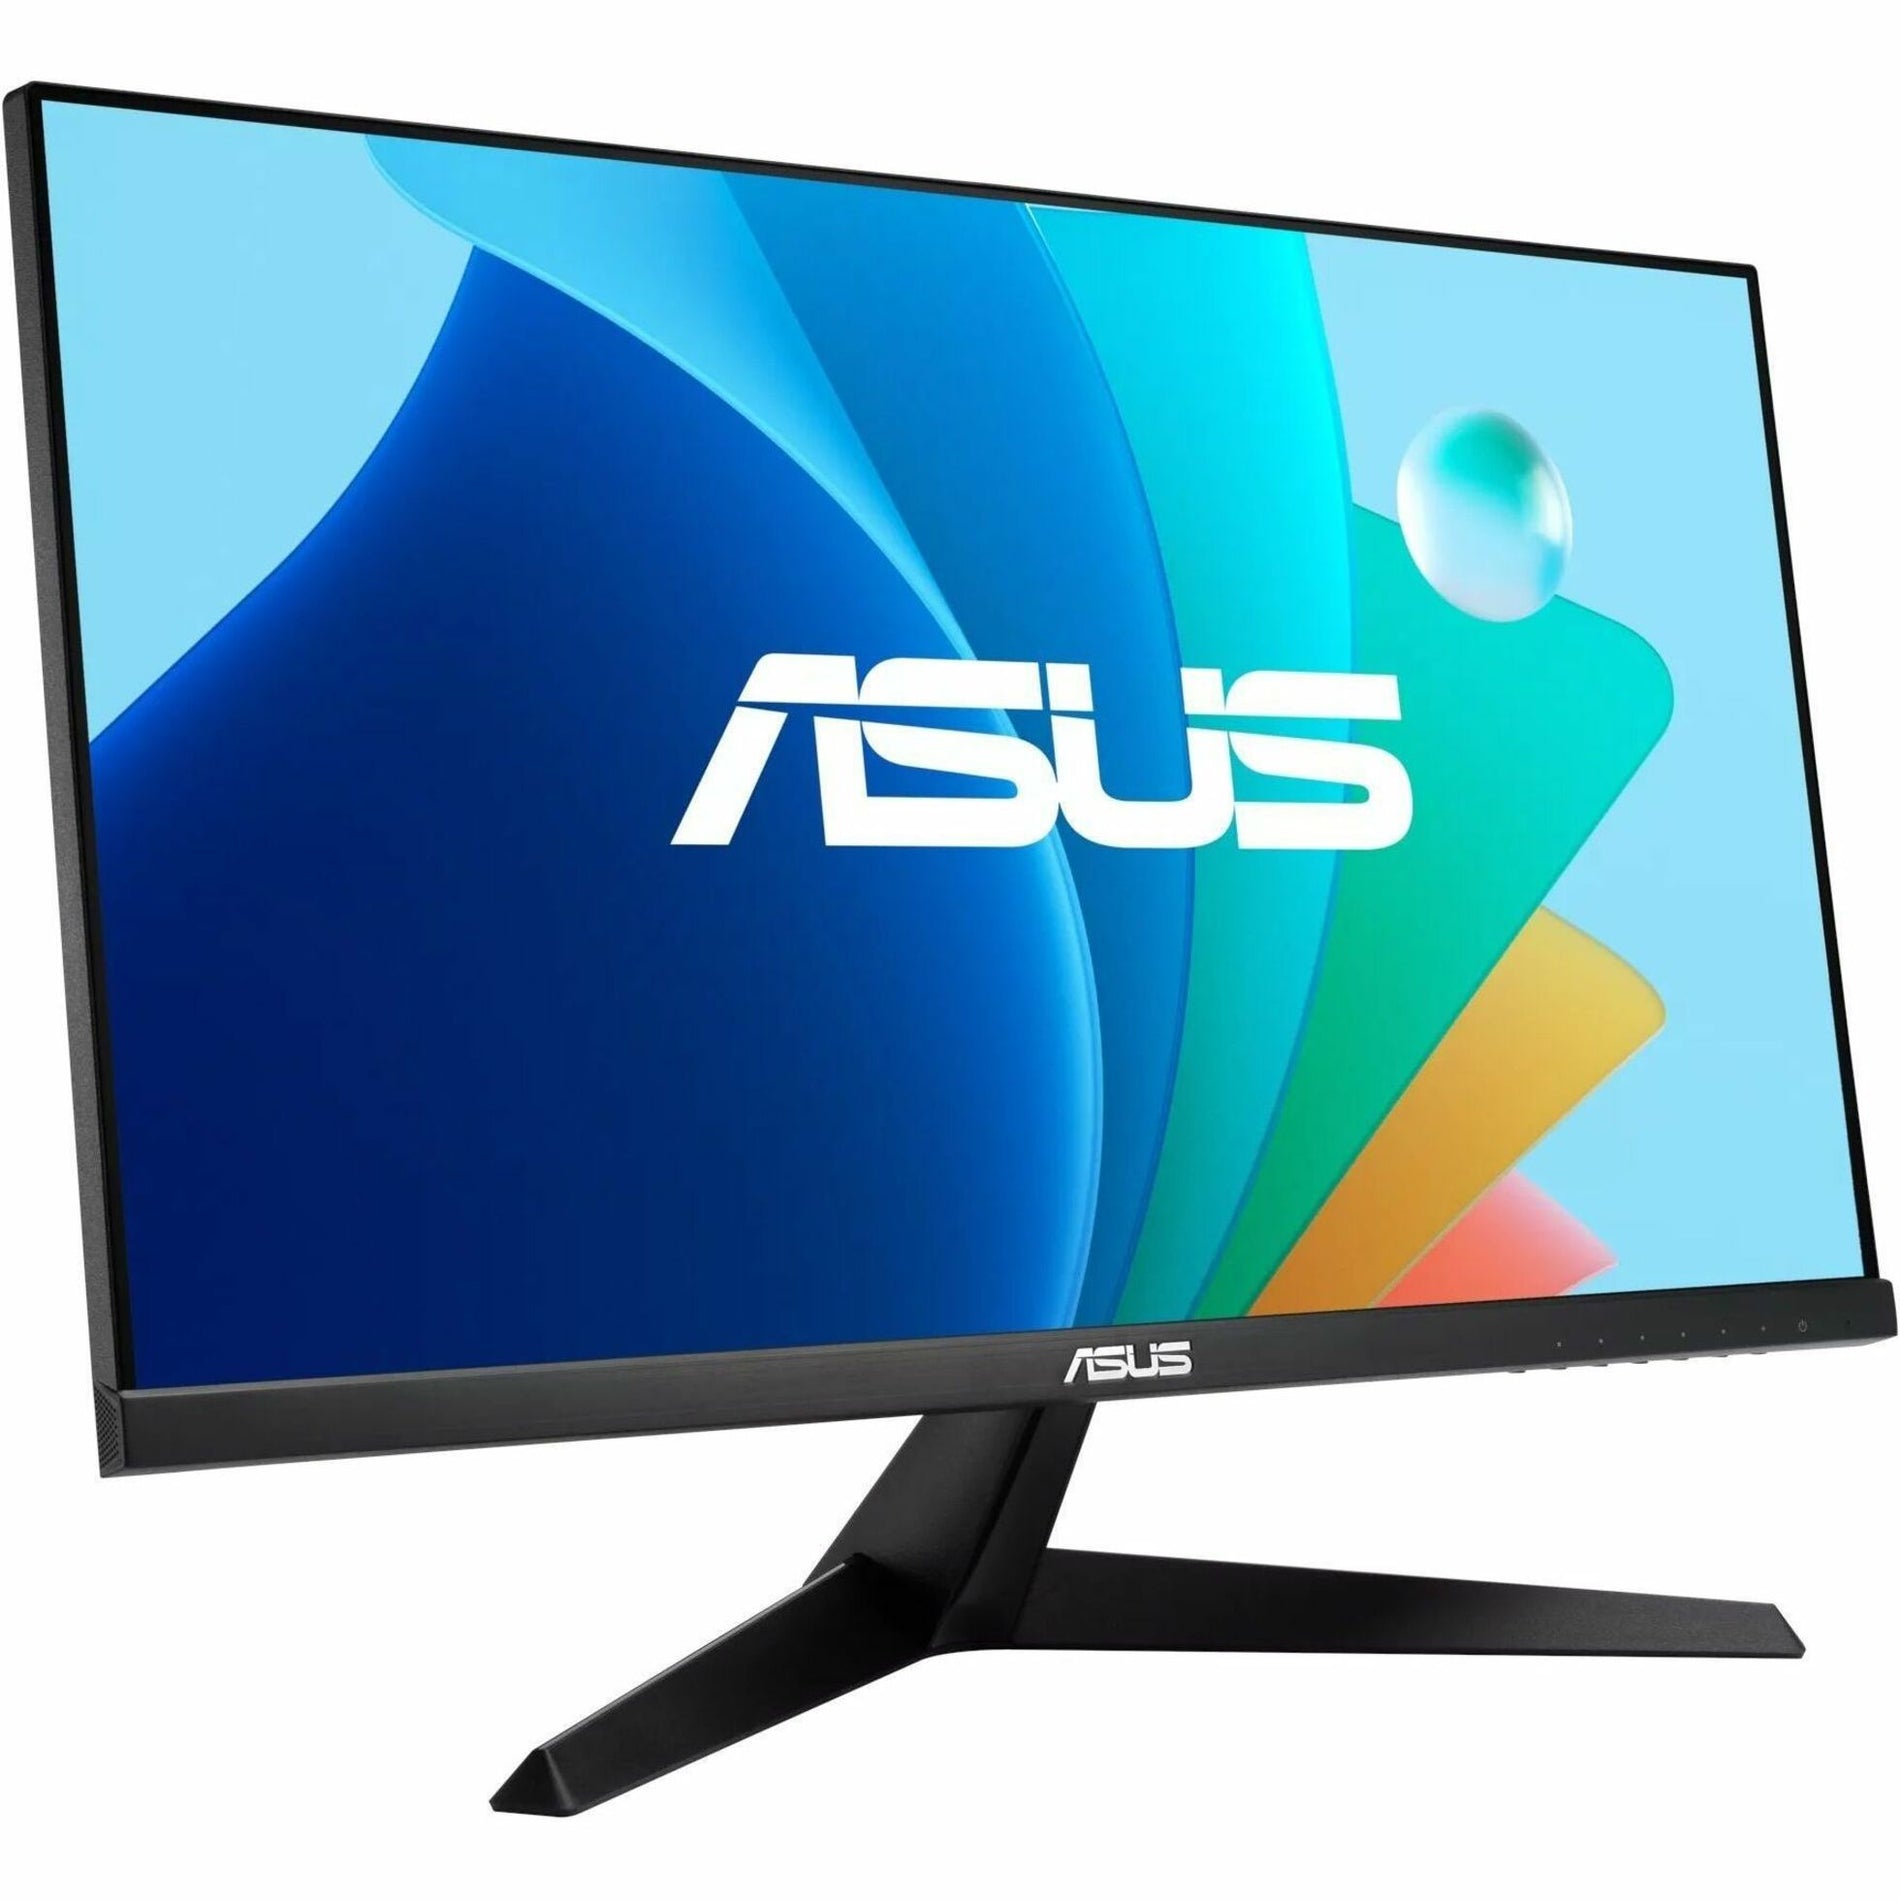 Asus VY249HF Gaming LED Monitor 24", Full HD, Adaptive Sync, 1ms Response Time, 100Hz Refresh Rate, HDMI 1.4, Energy Star, TCO Certified, 36 Month Warranty